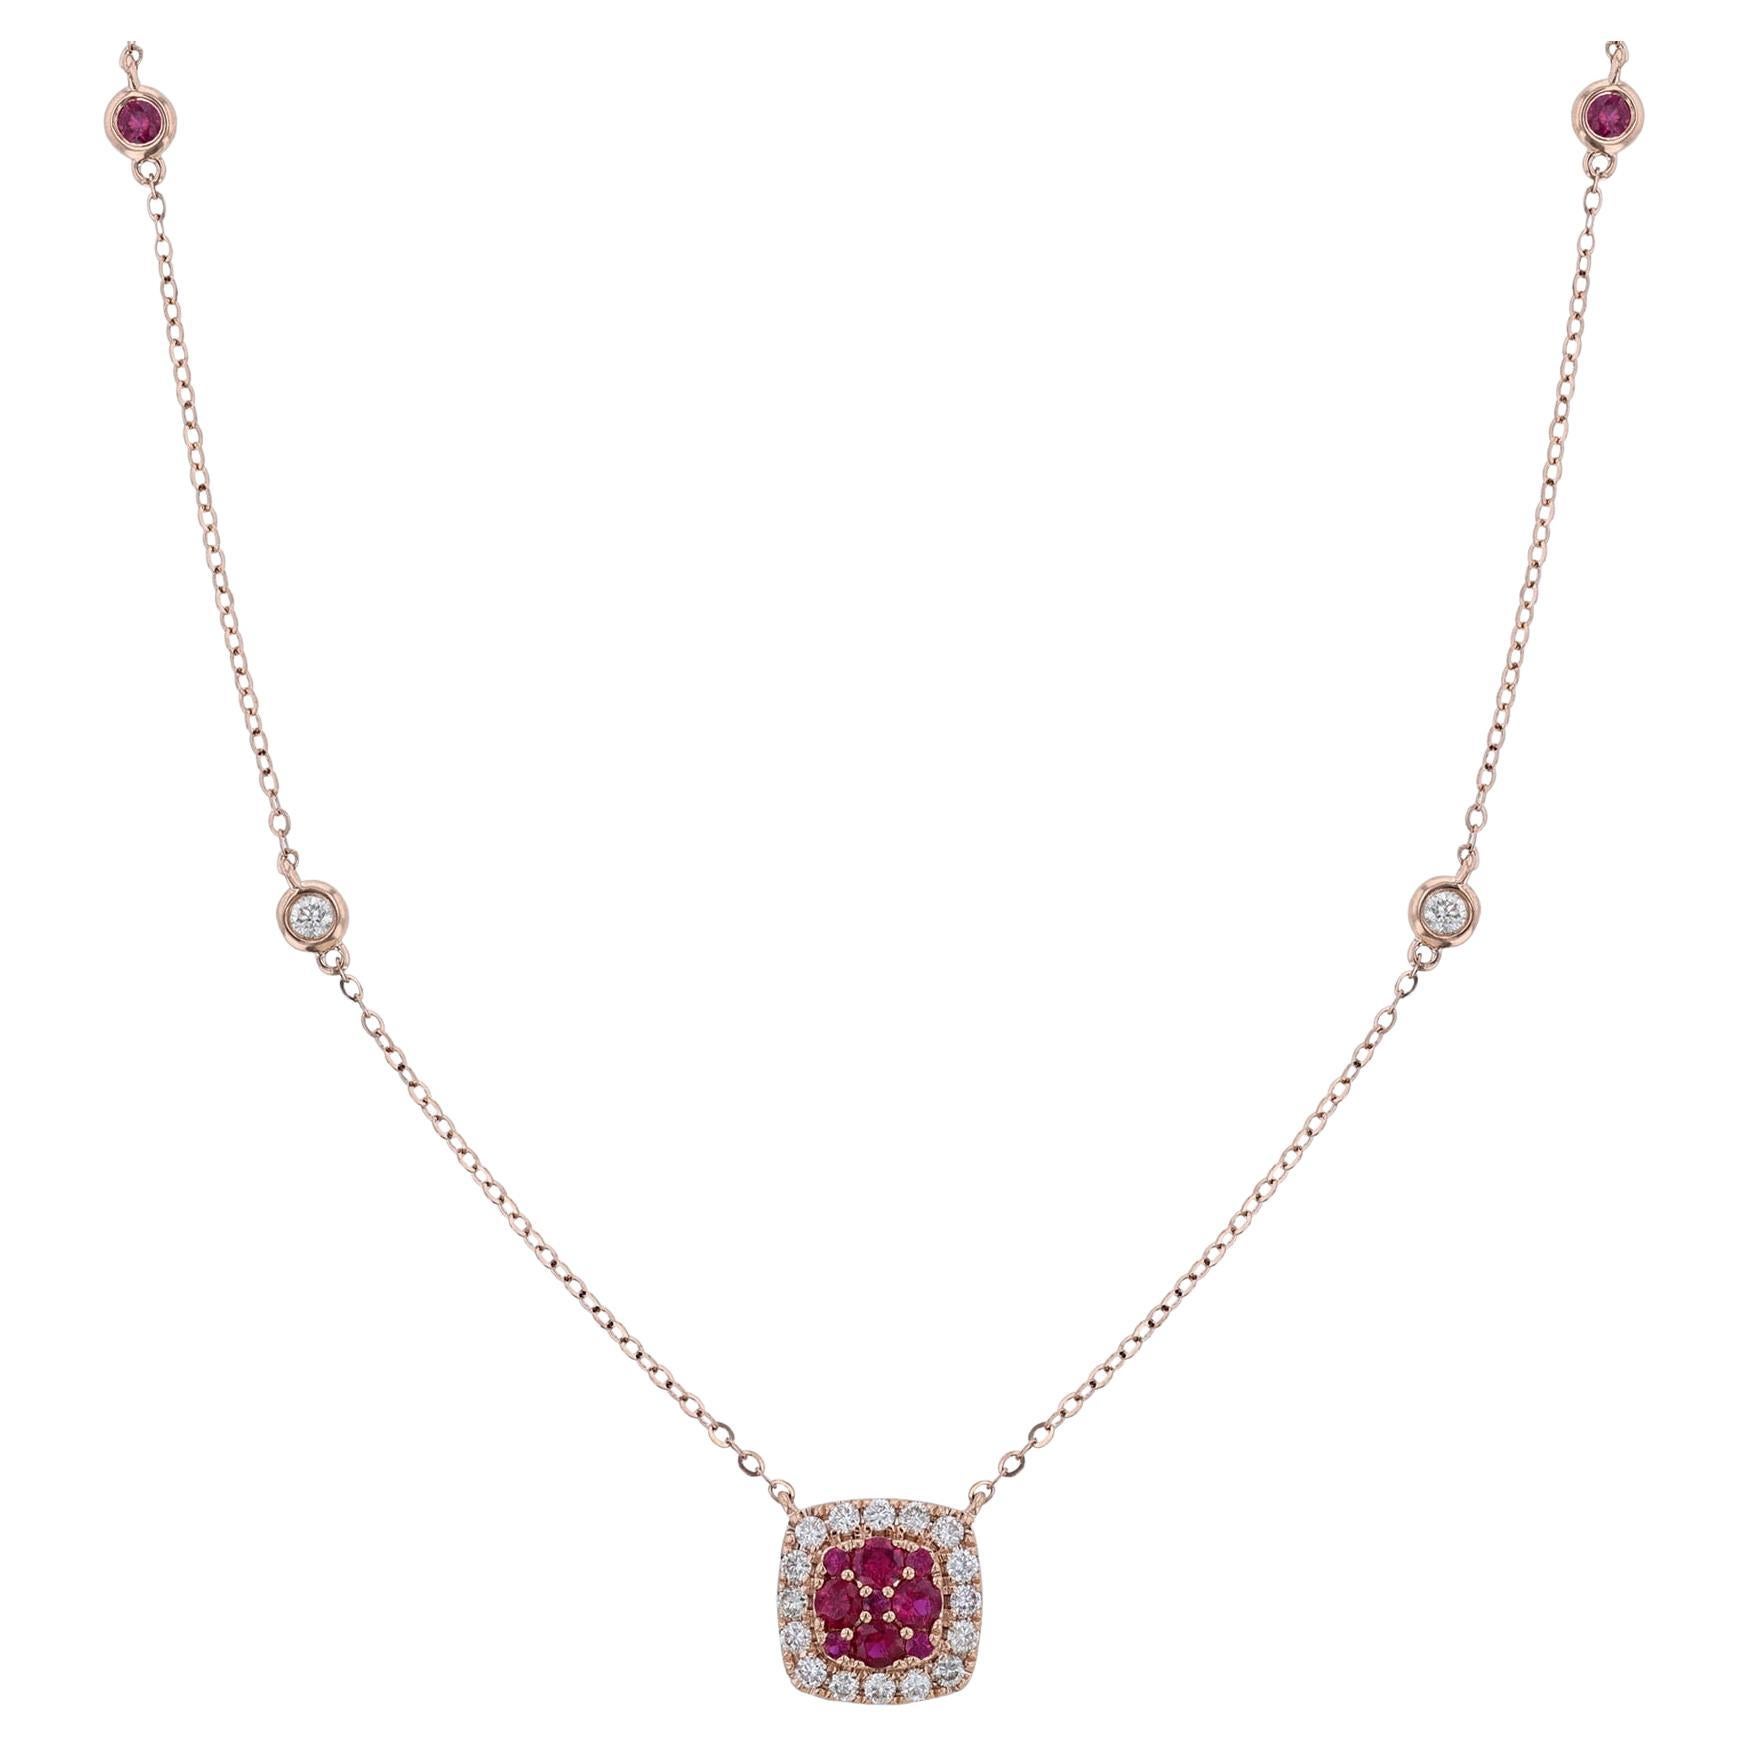 This pendant necklace is made in 18K rose gold. It features a cushion shape pendant with 9 round cut, center rubies. Surrounded by a halo of 16 round cut diamonds. With 2 round cut, bezel diamonds stations, and 2 ruby bezel stations. The necklace